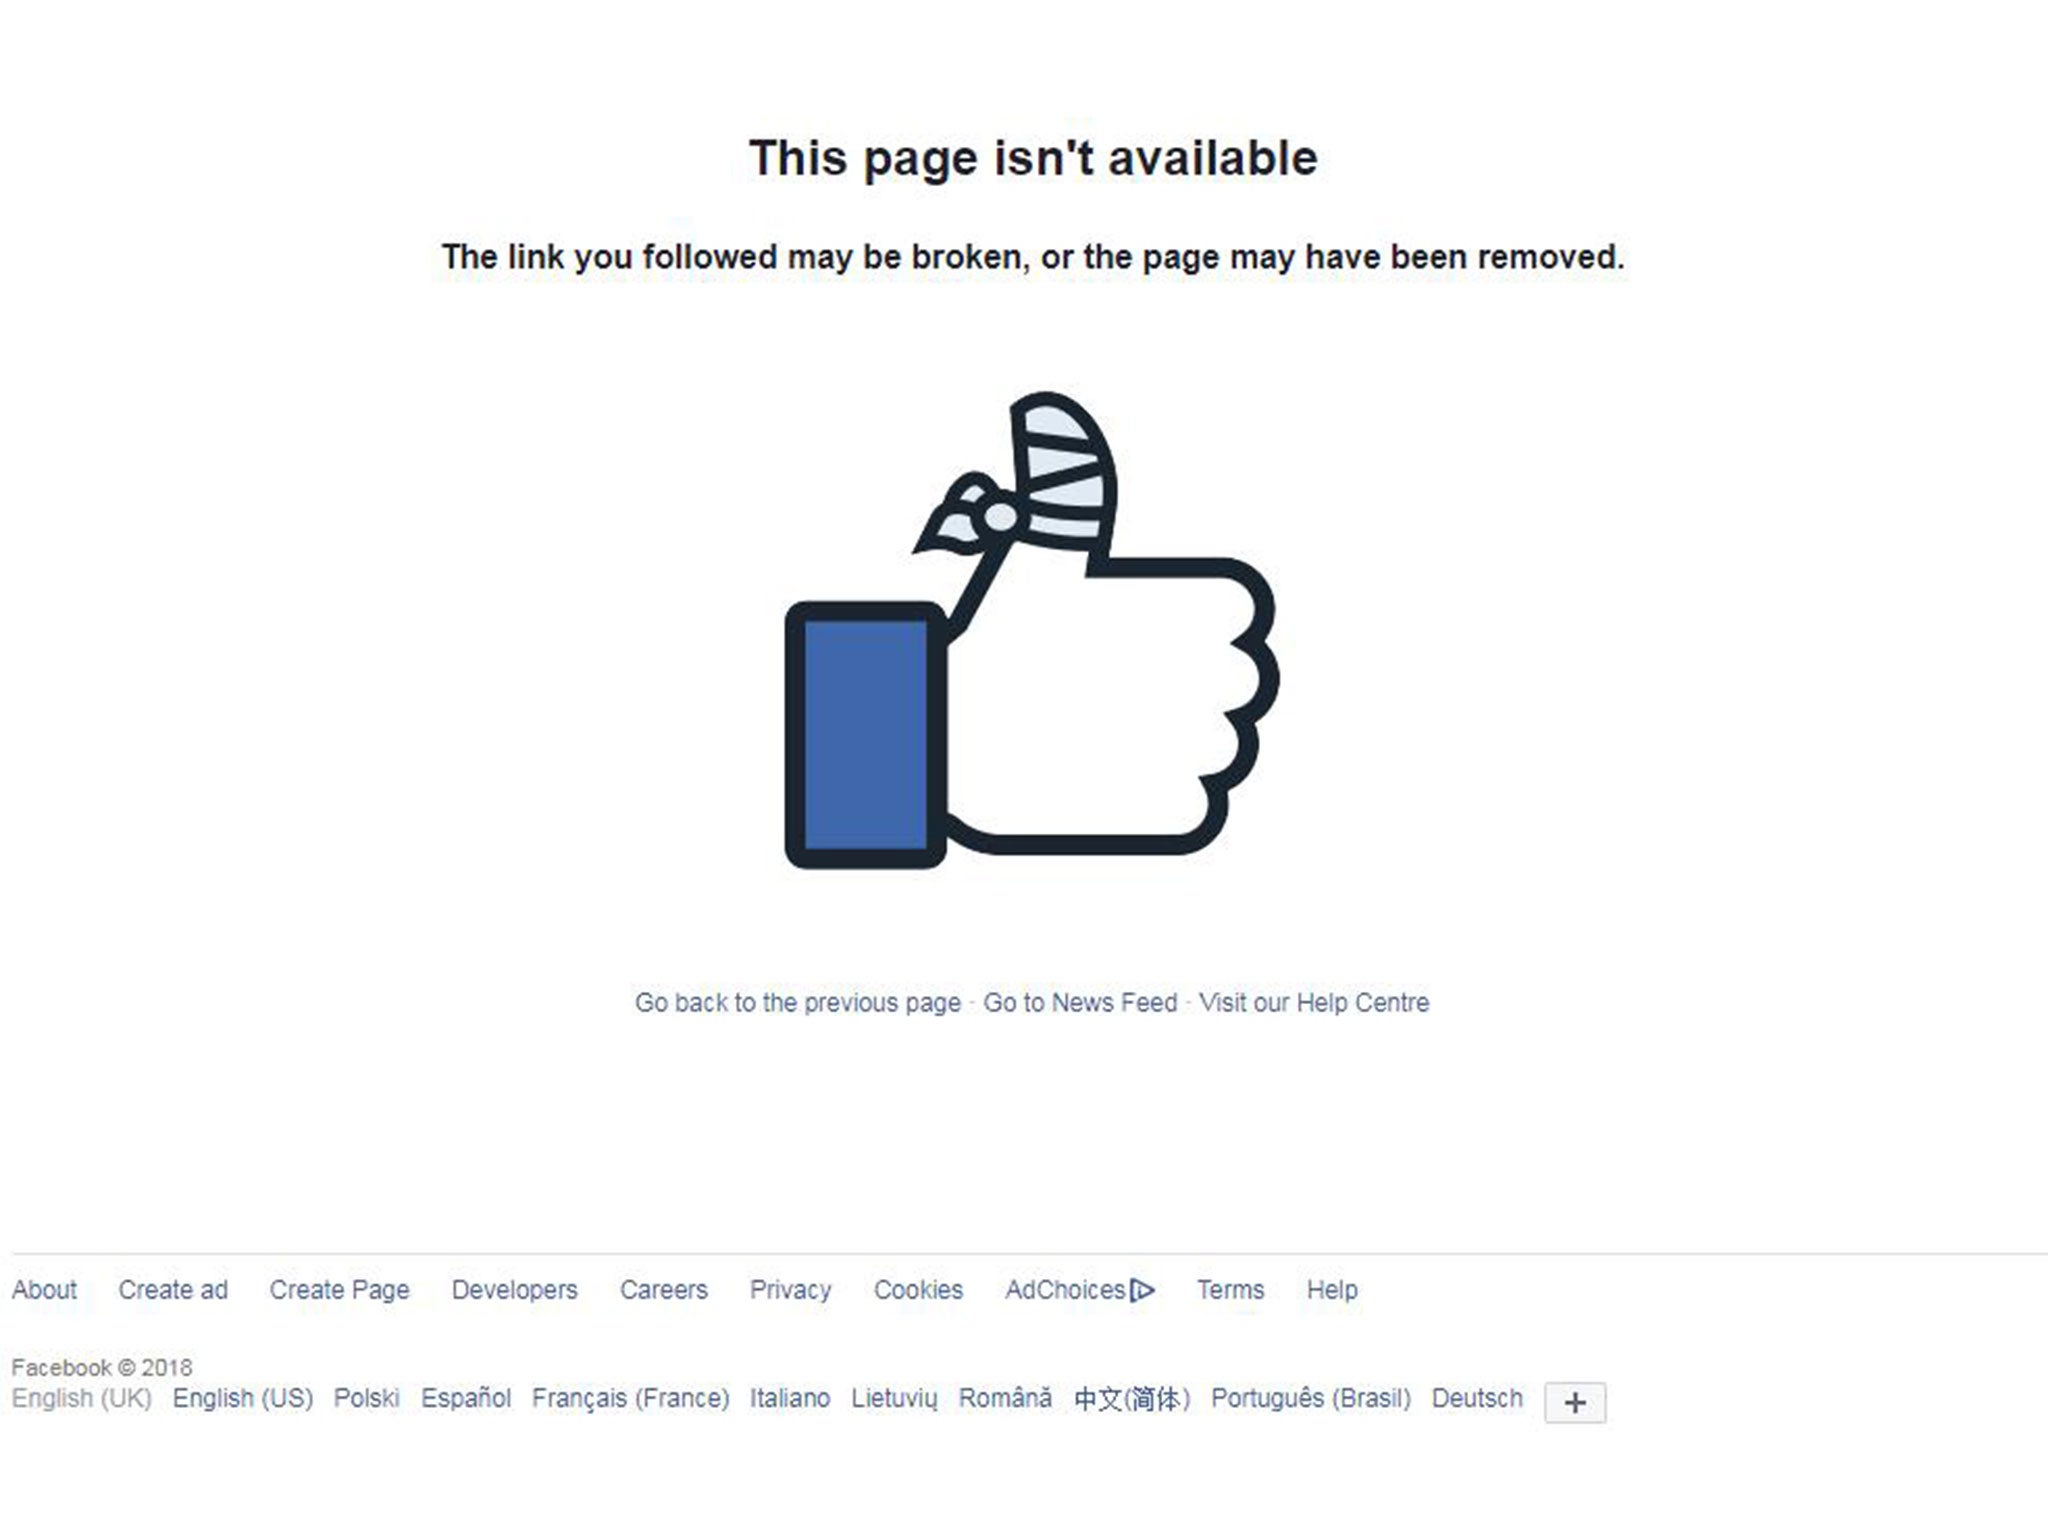 Britain First's official Facebook page has been deleted